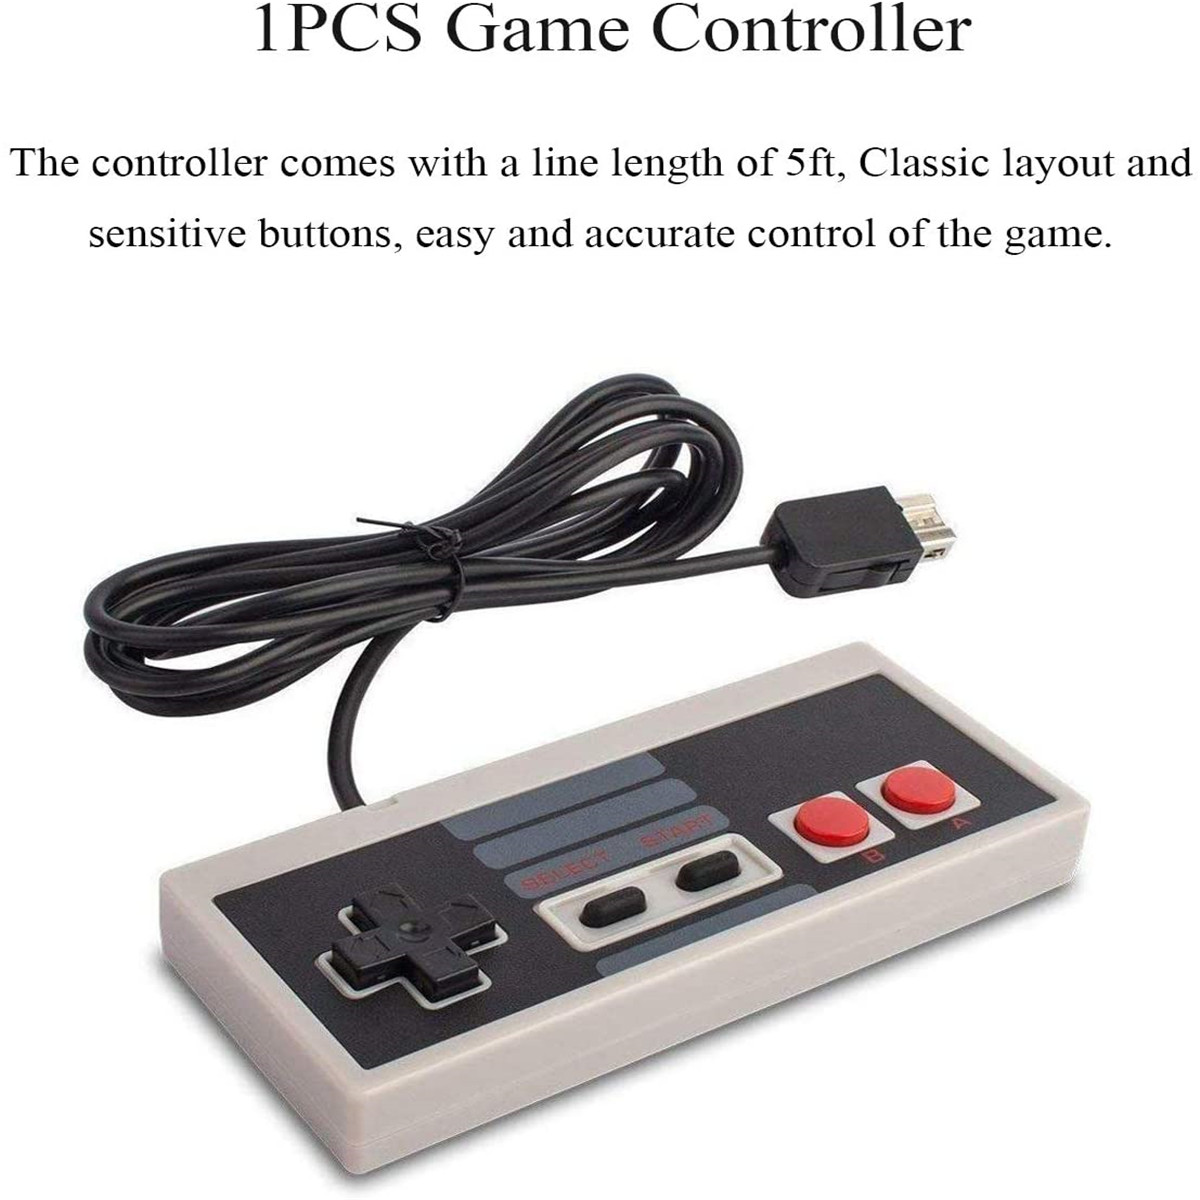 1 NES Mini Classic Controller with 2 Pack of 10ft Extension Cable for NES Classic, SNES Classic, Wii and Wii U Controller - image 3 of 7